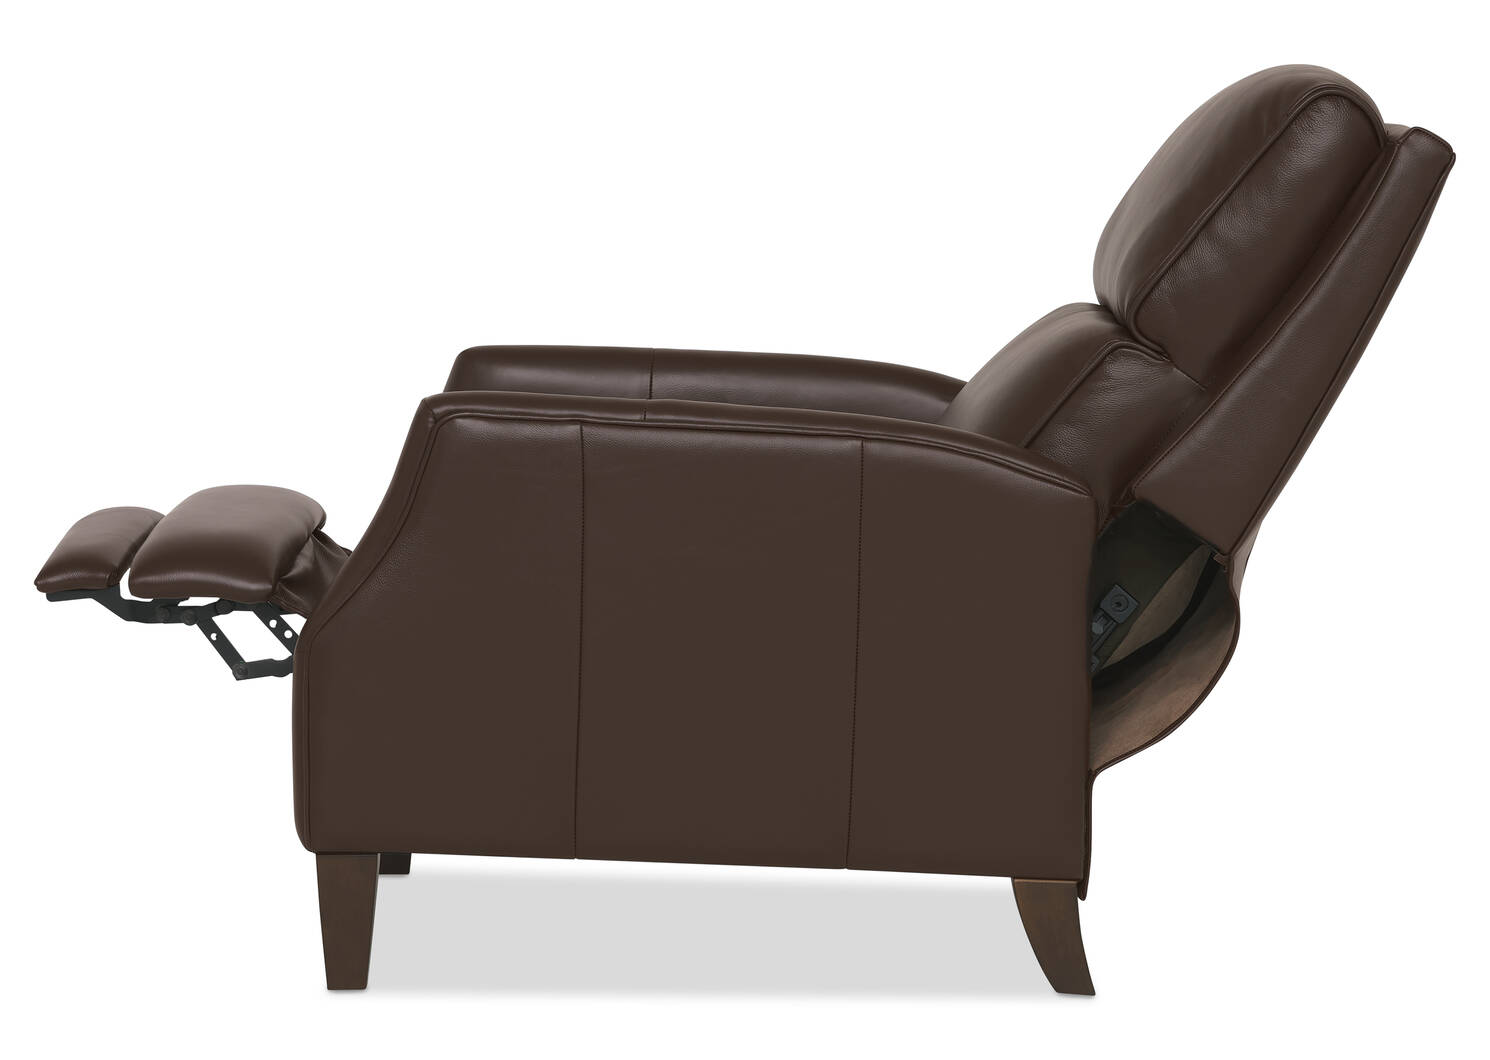 Barret Leather Recliner -Arlo Chocolate